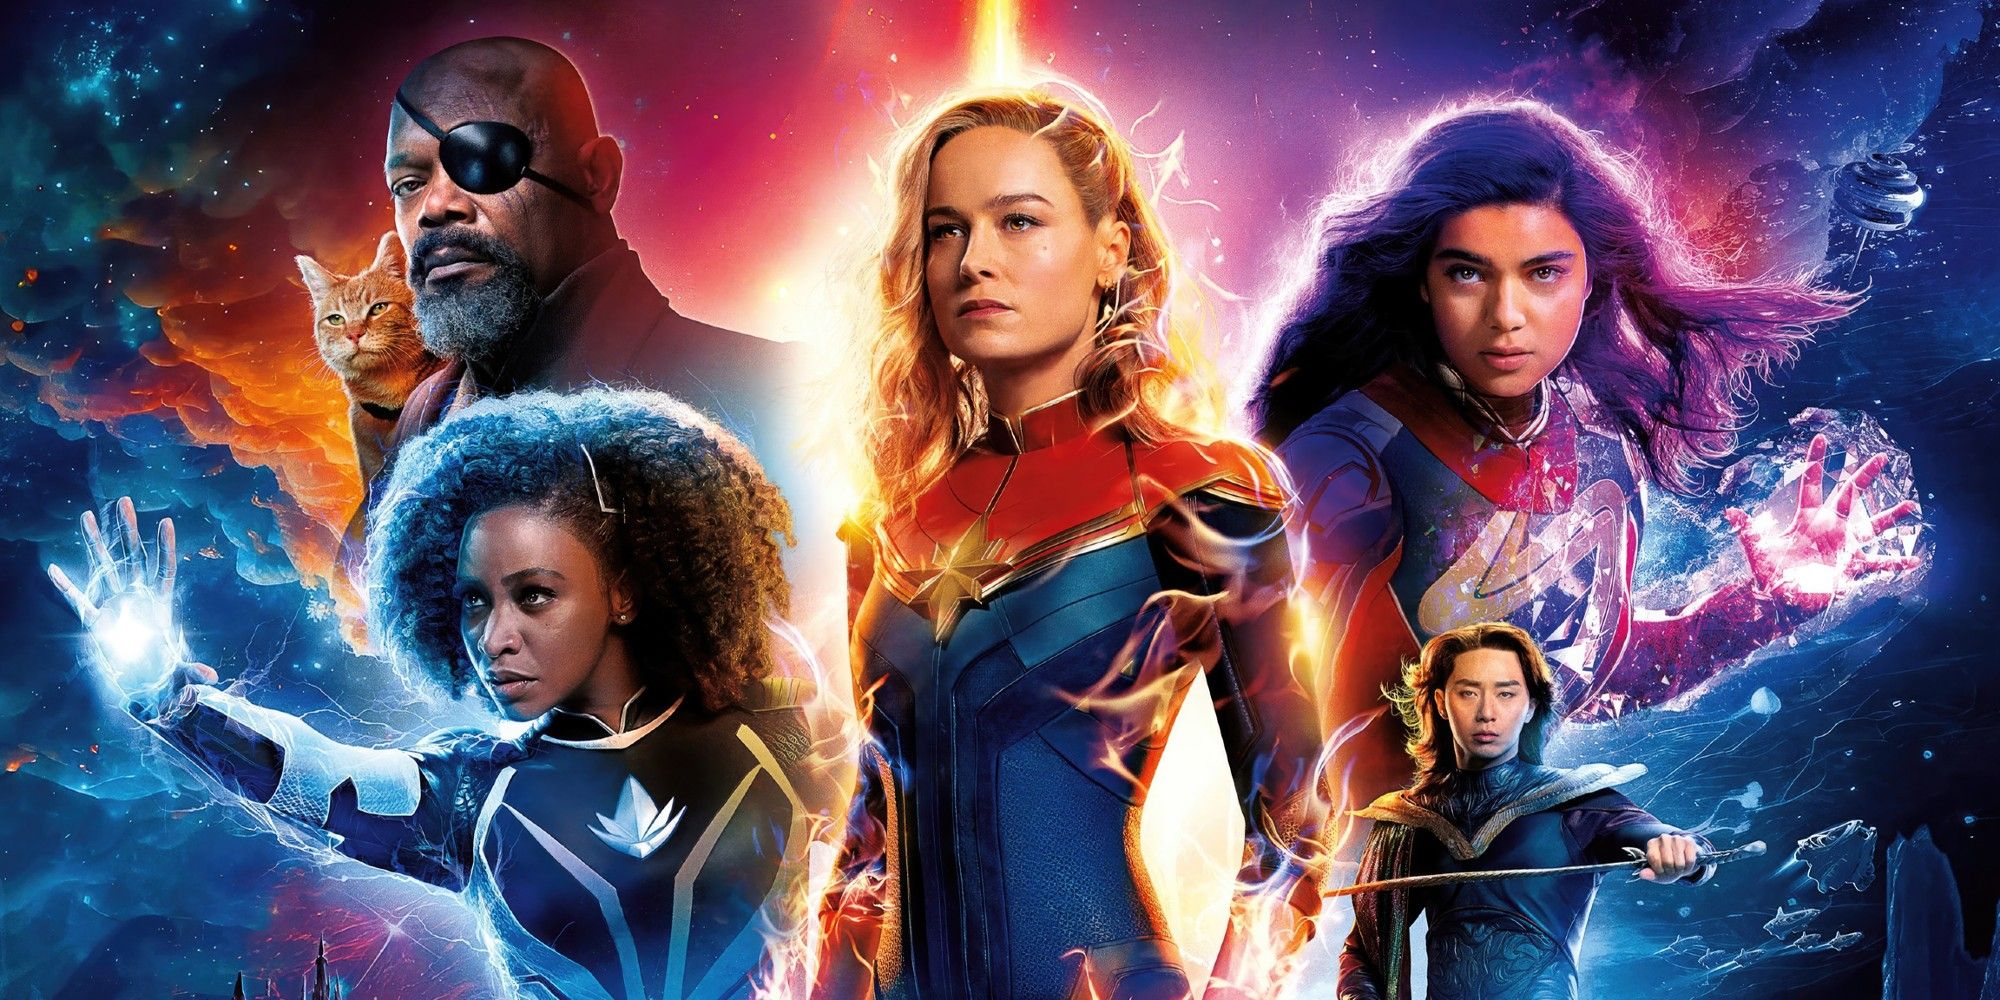 The Marvels Streaming Release Date Updates – When Will It Premiere On Disney Plus?